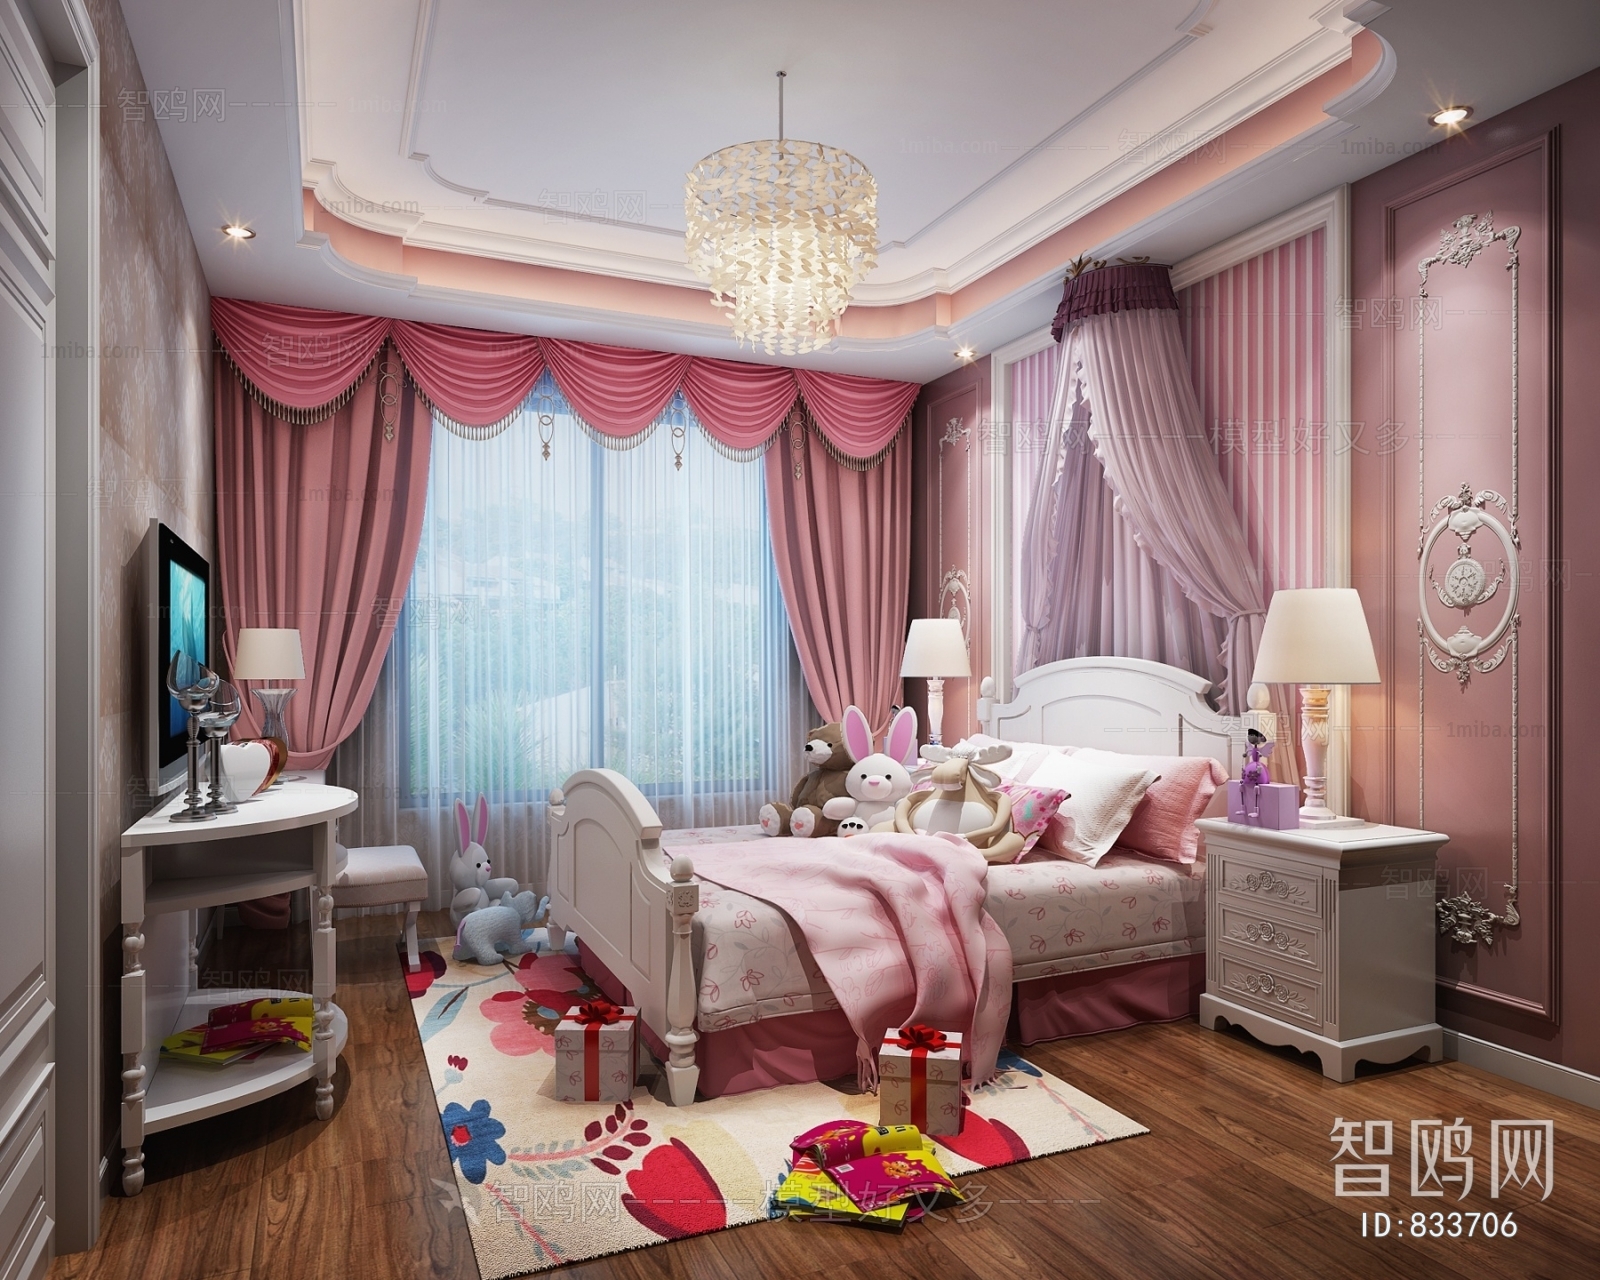 New Classical Style Girl's Room Daughter's Room